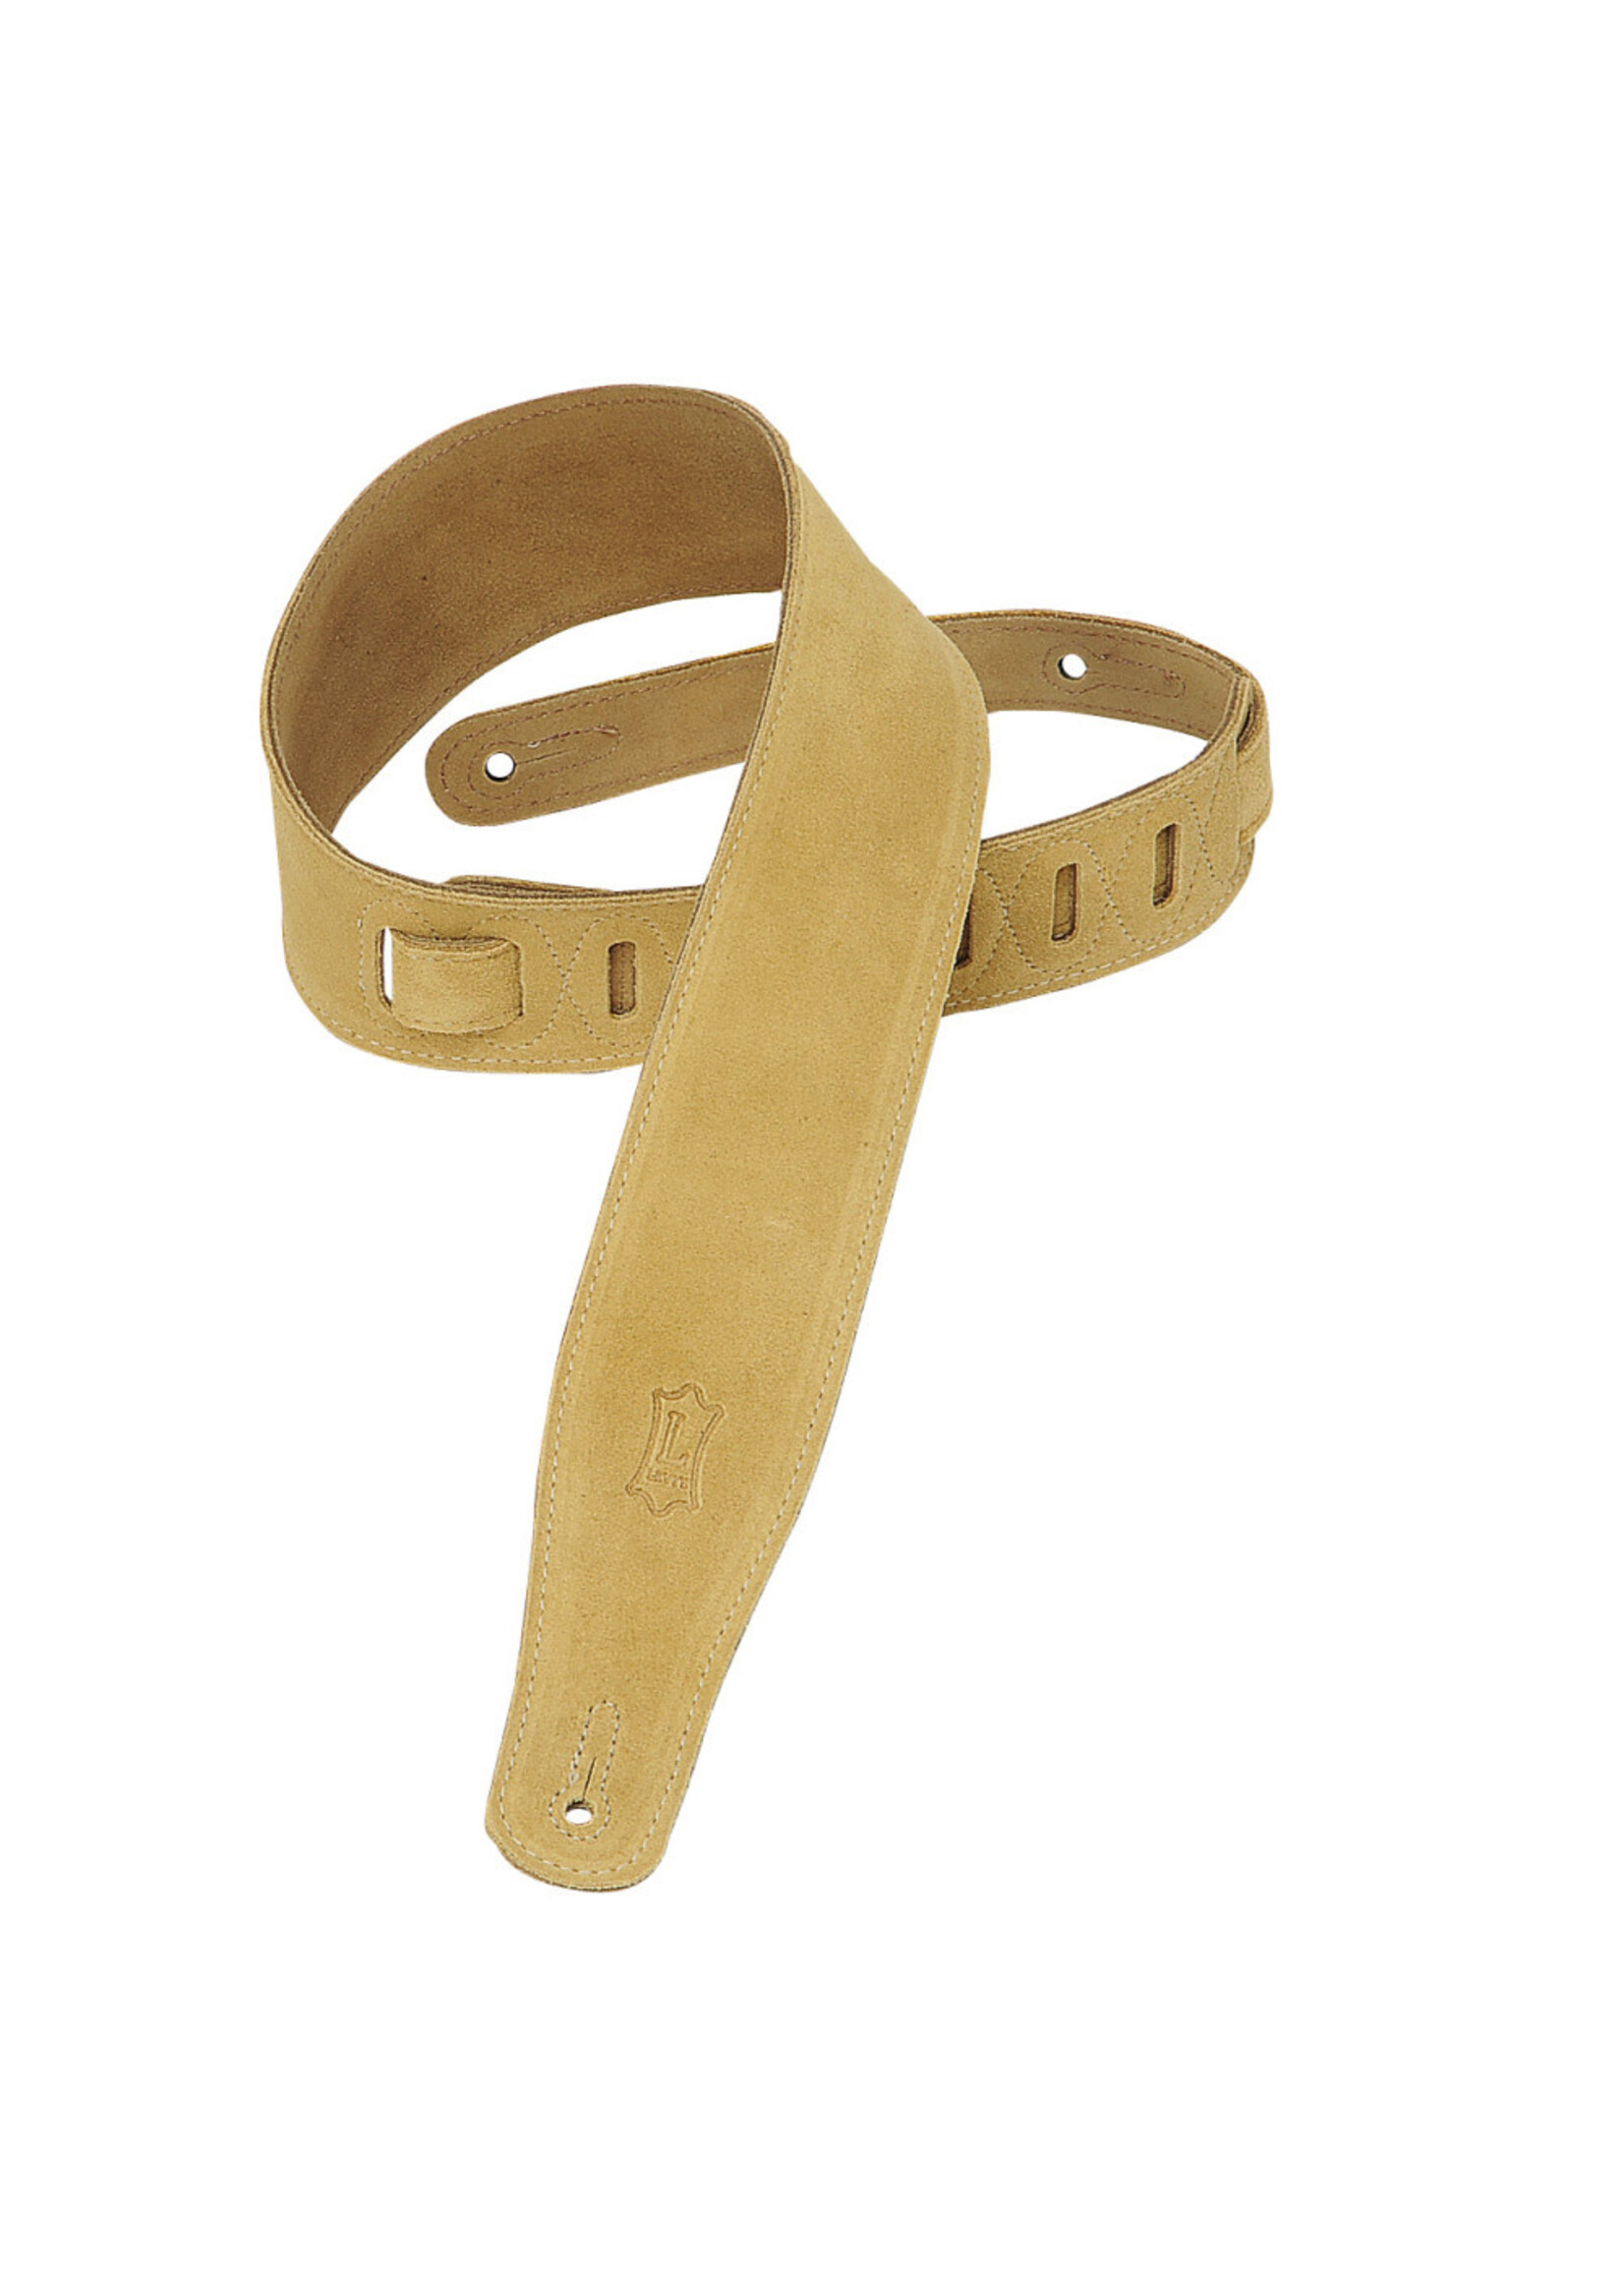 Levy's Levy's Guitar Strap 2.5" Classic Series Suede